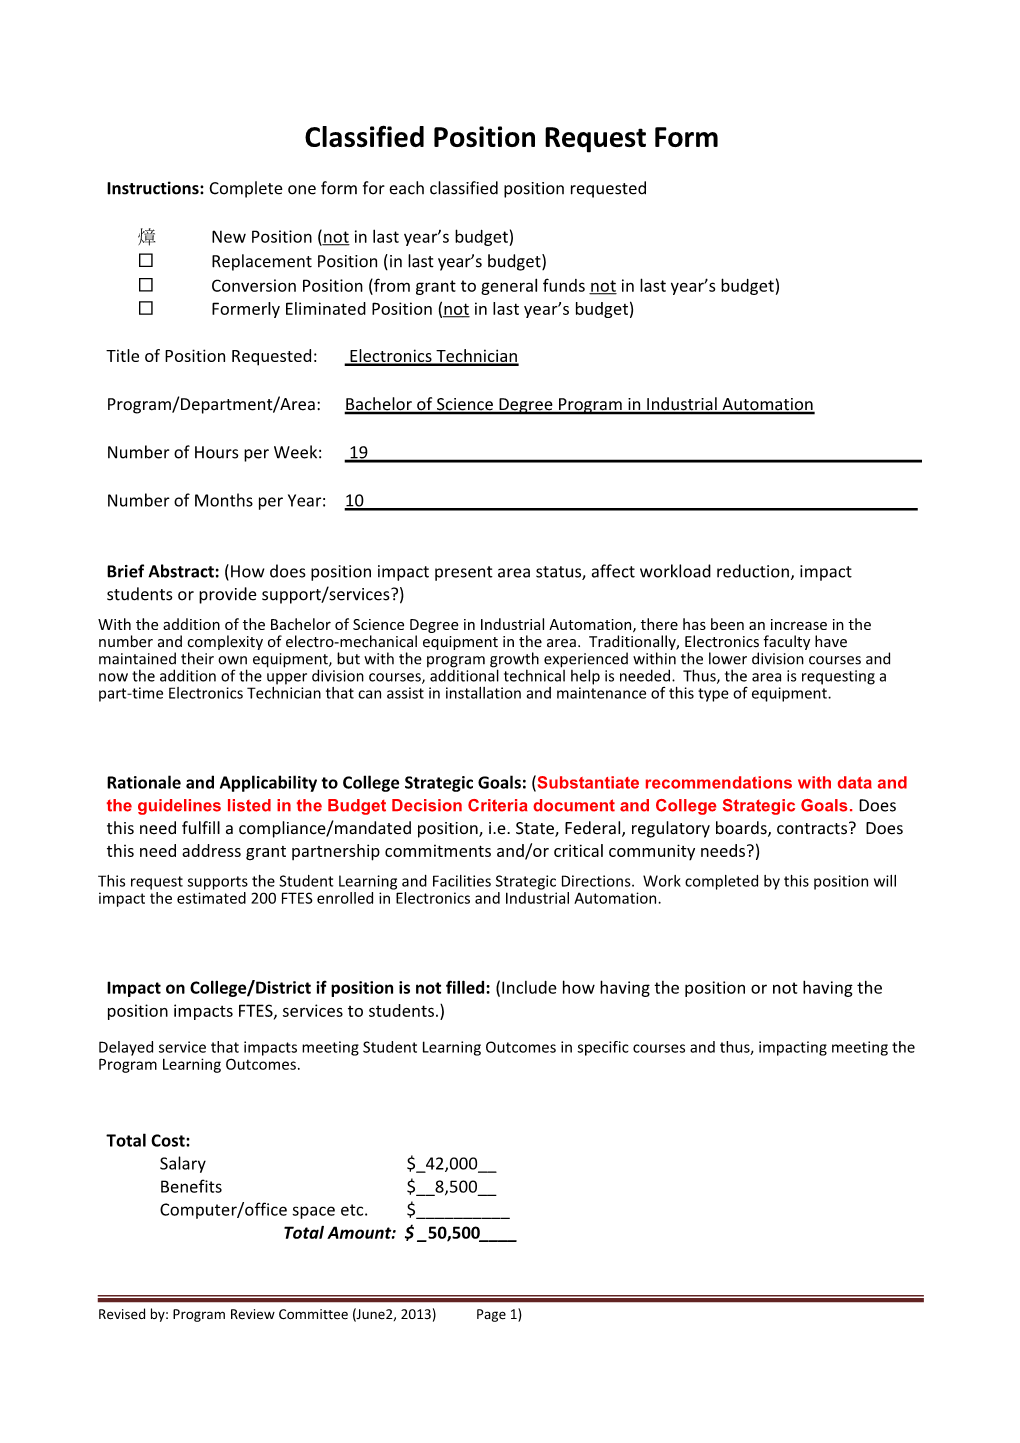 Classified Position Request Form